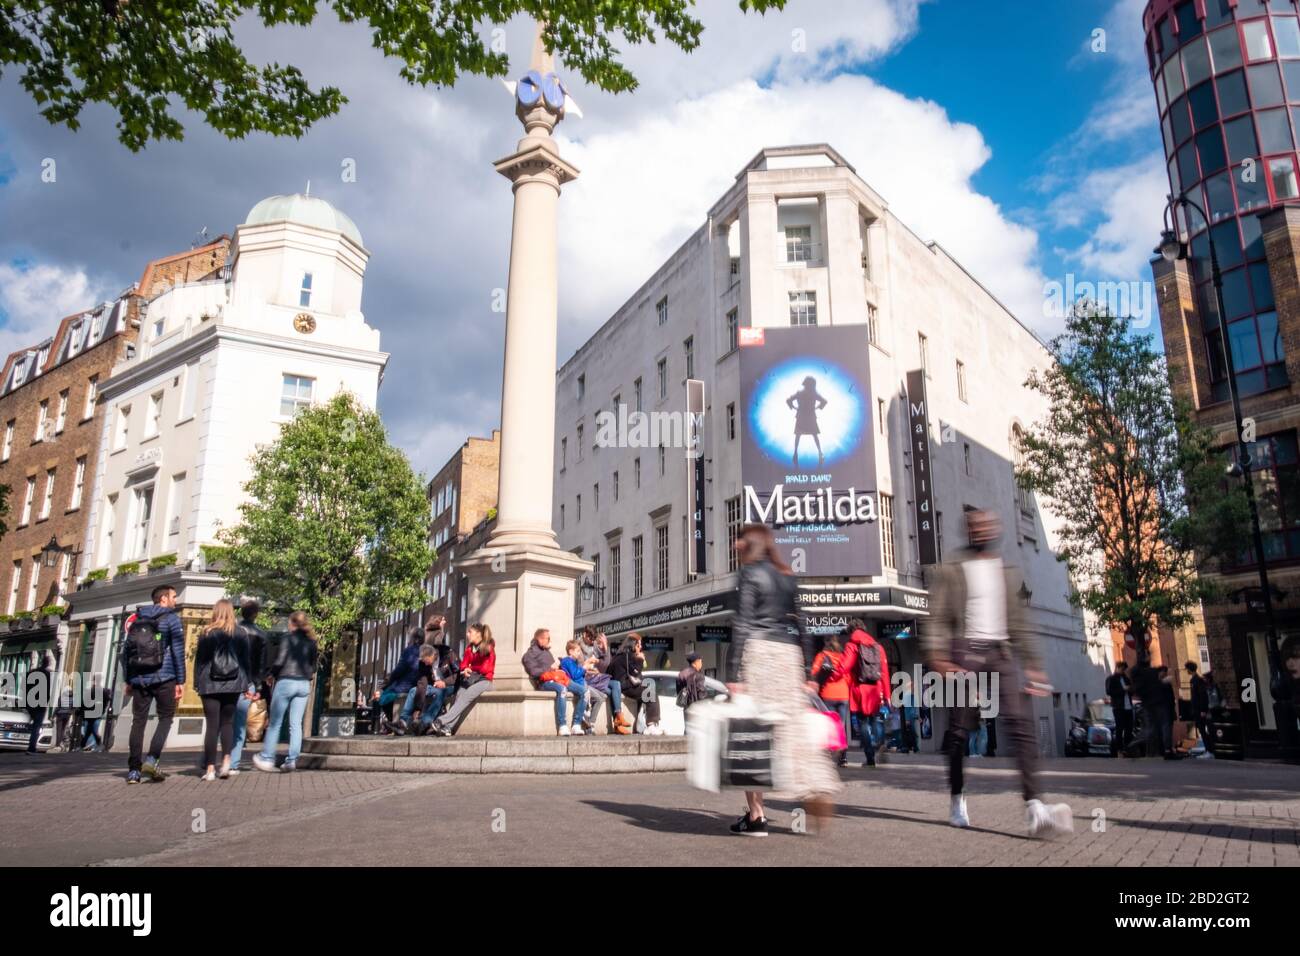 LONDON- The Cambridge Theatre at Severn Dials in London's West End showing Matilda the Musical Stock Photo